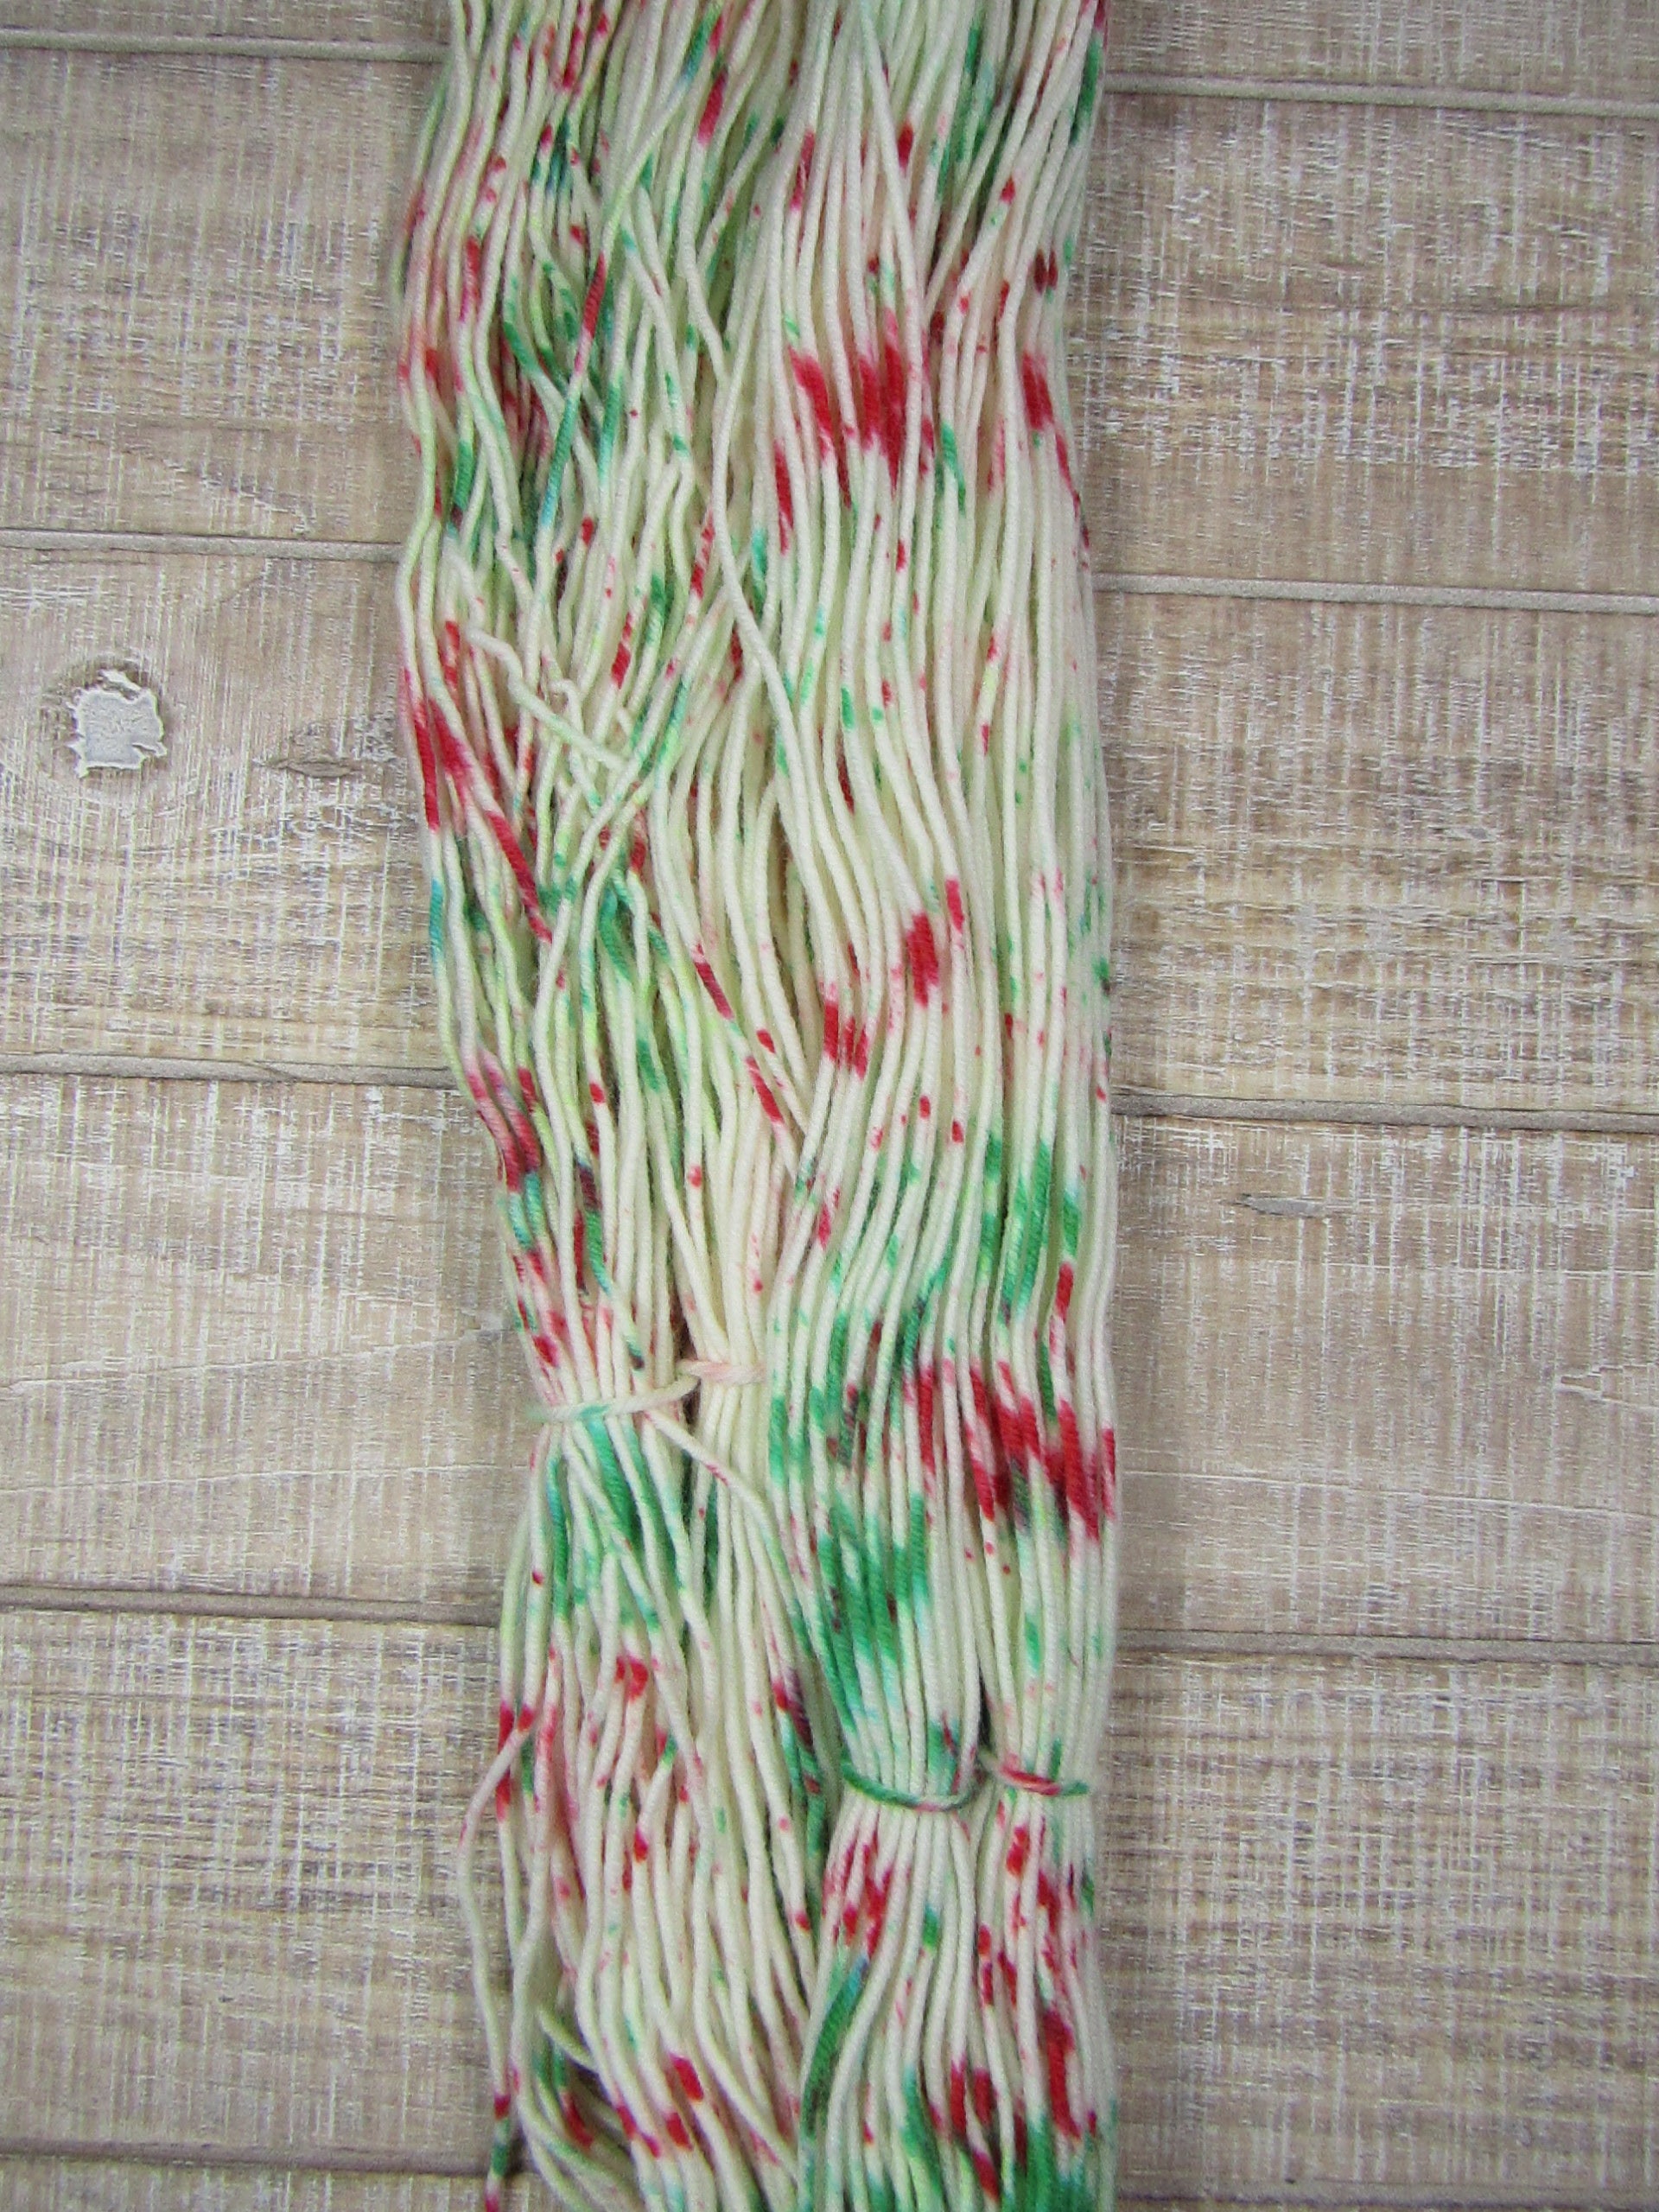 Hand-dyed yarn - Candy Cane Merino/Cashstyle nylon worsted weight yarn with green and red speckles.